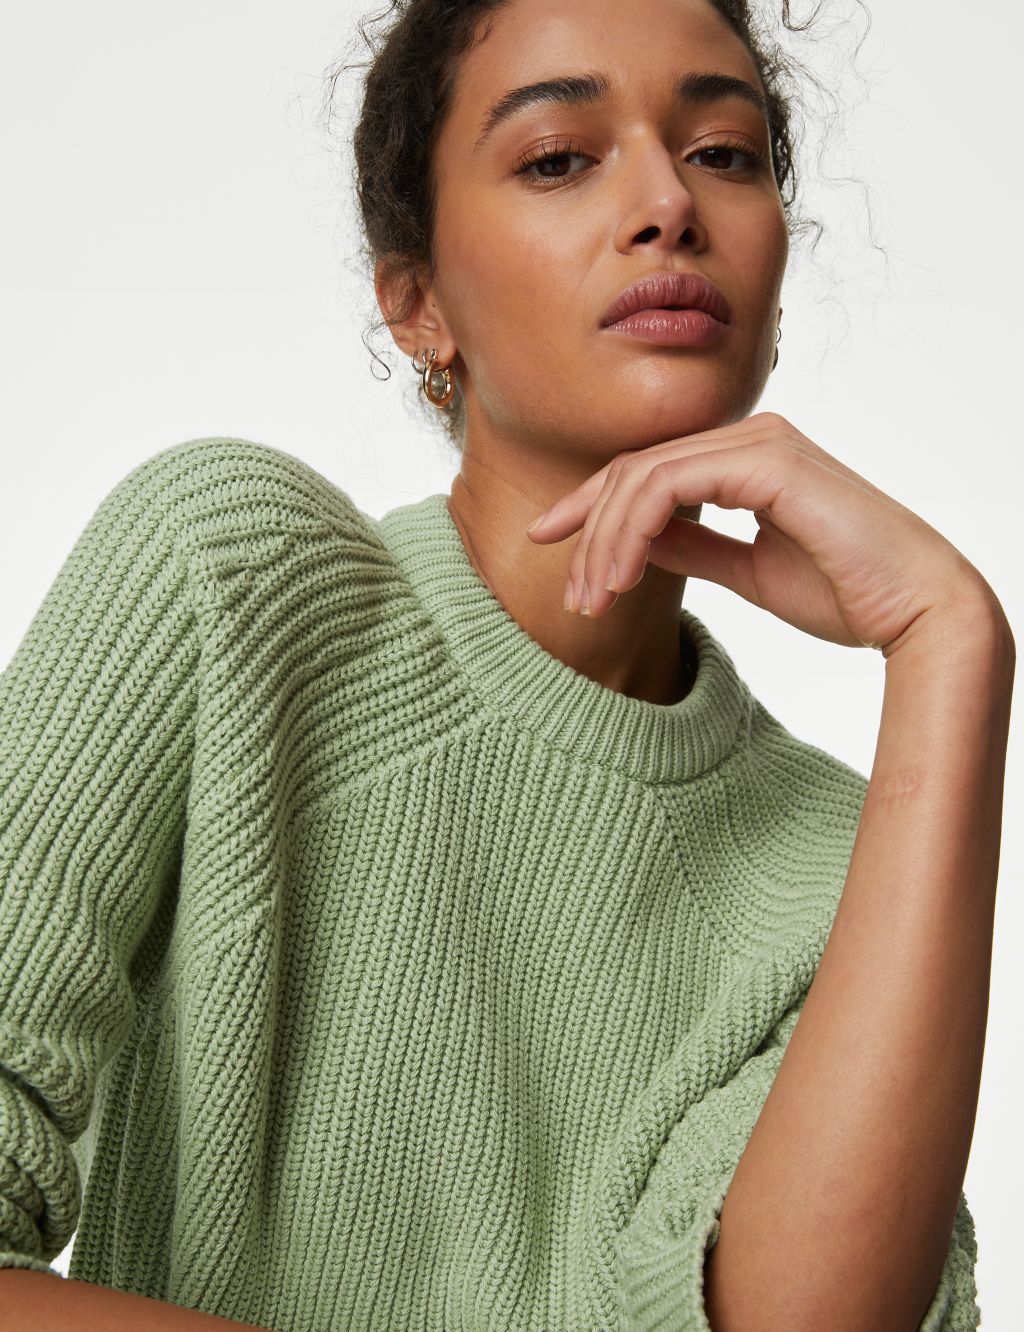 Cotton Rich Ribbed Crew Neck Jumper image 3